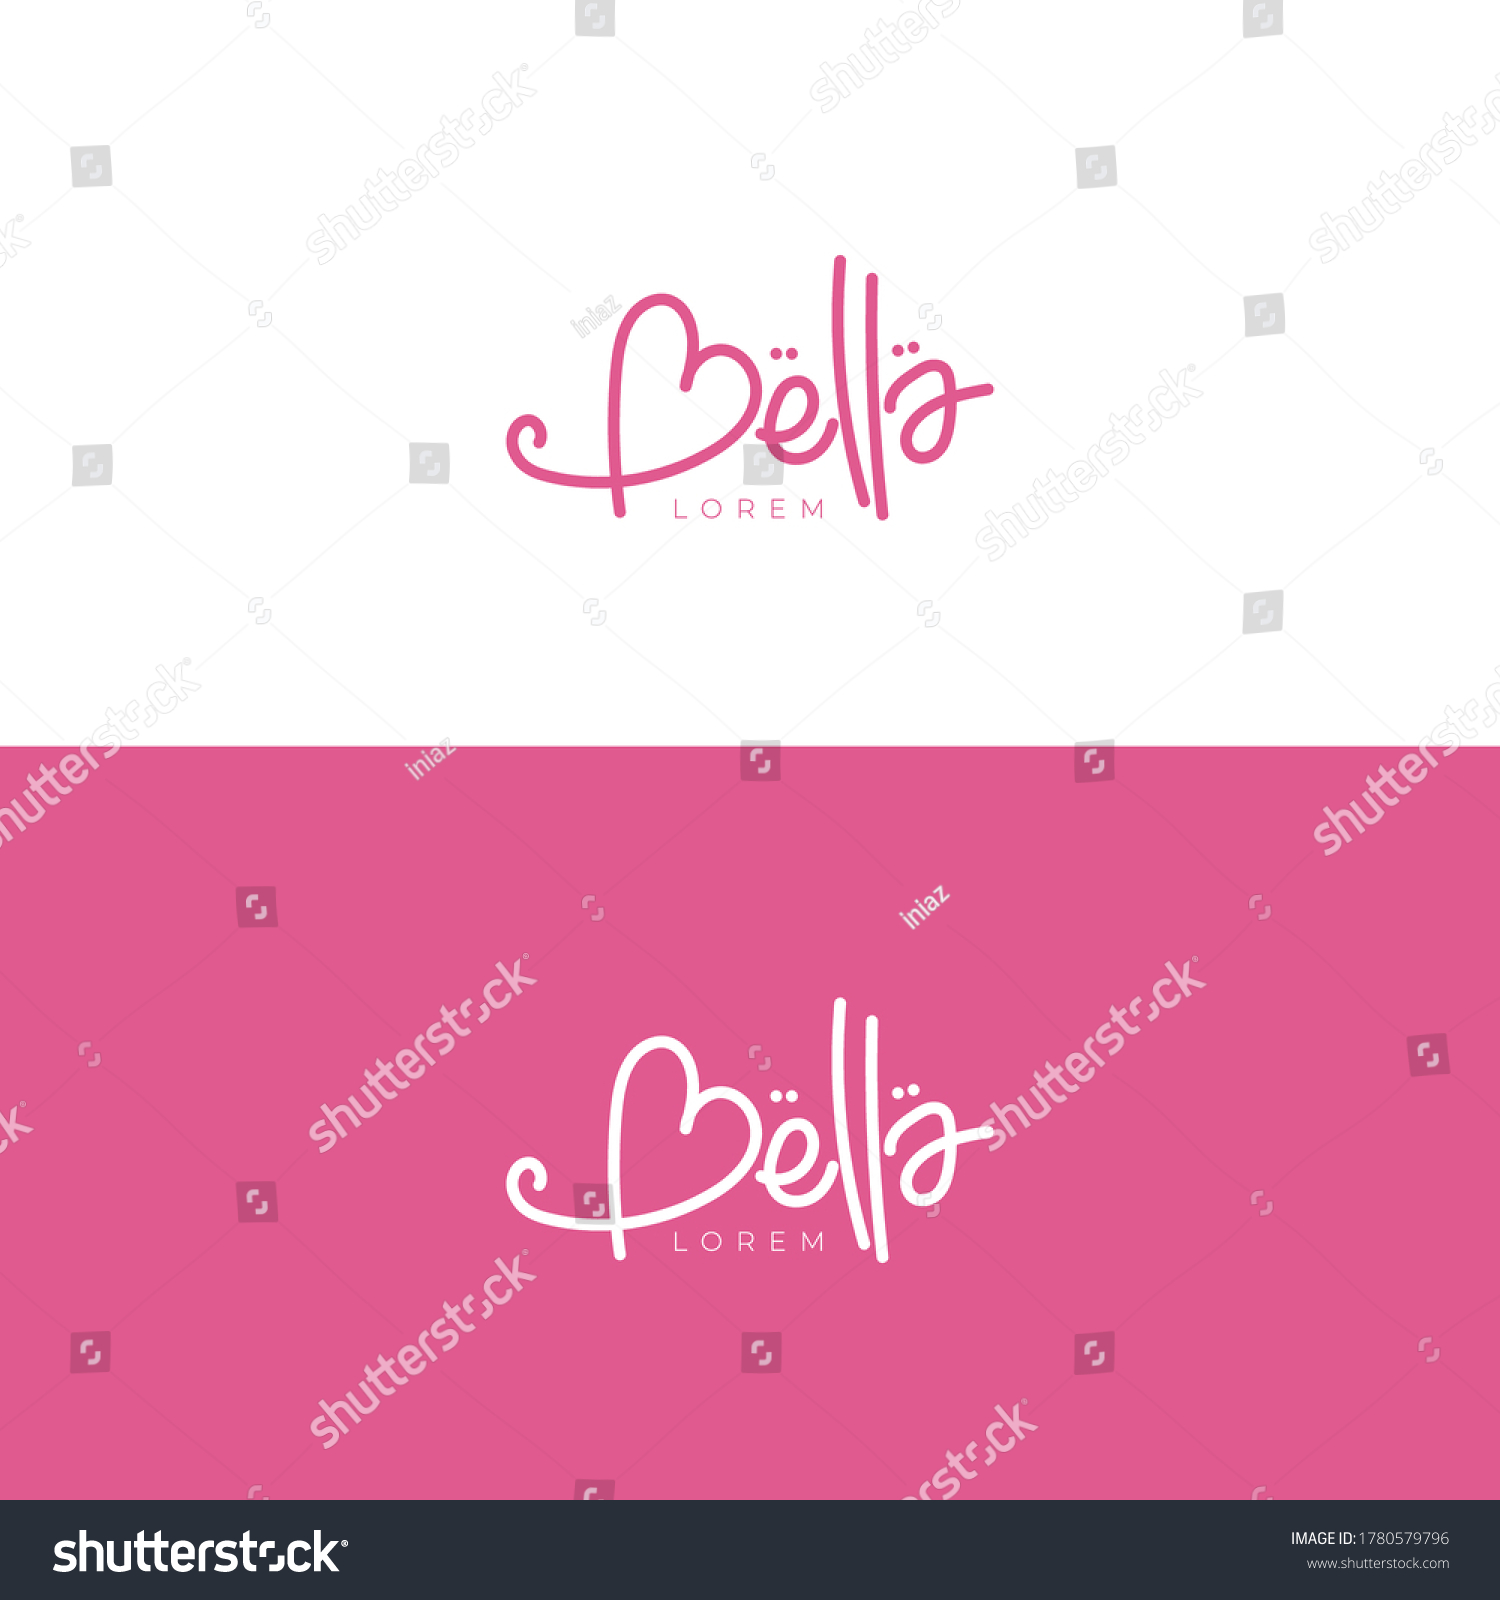 Logotype design with Bella naming with pink color for beauty or cosmetic logo #1780579796